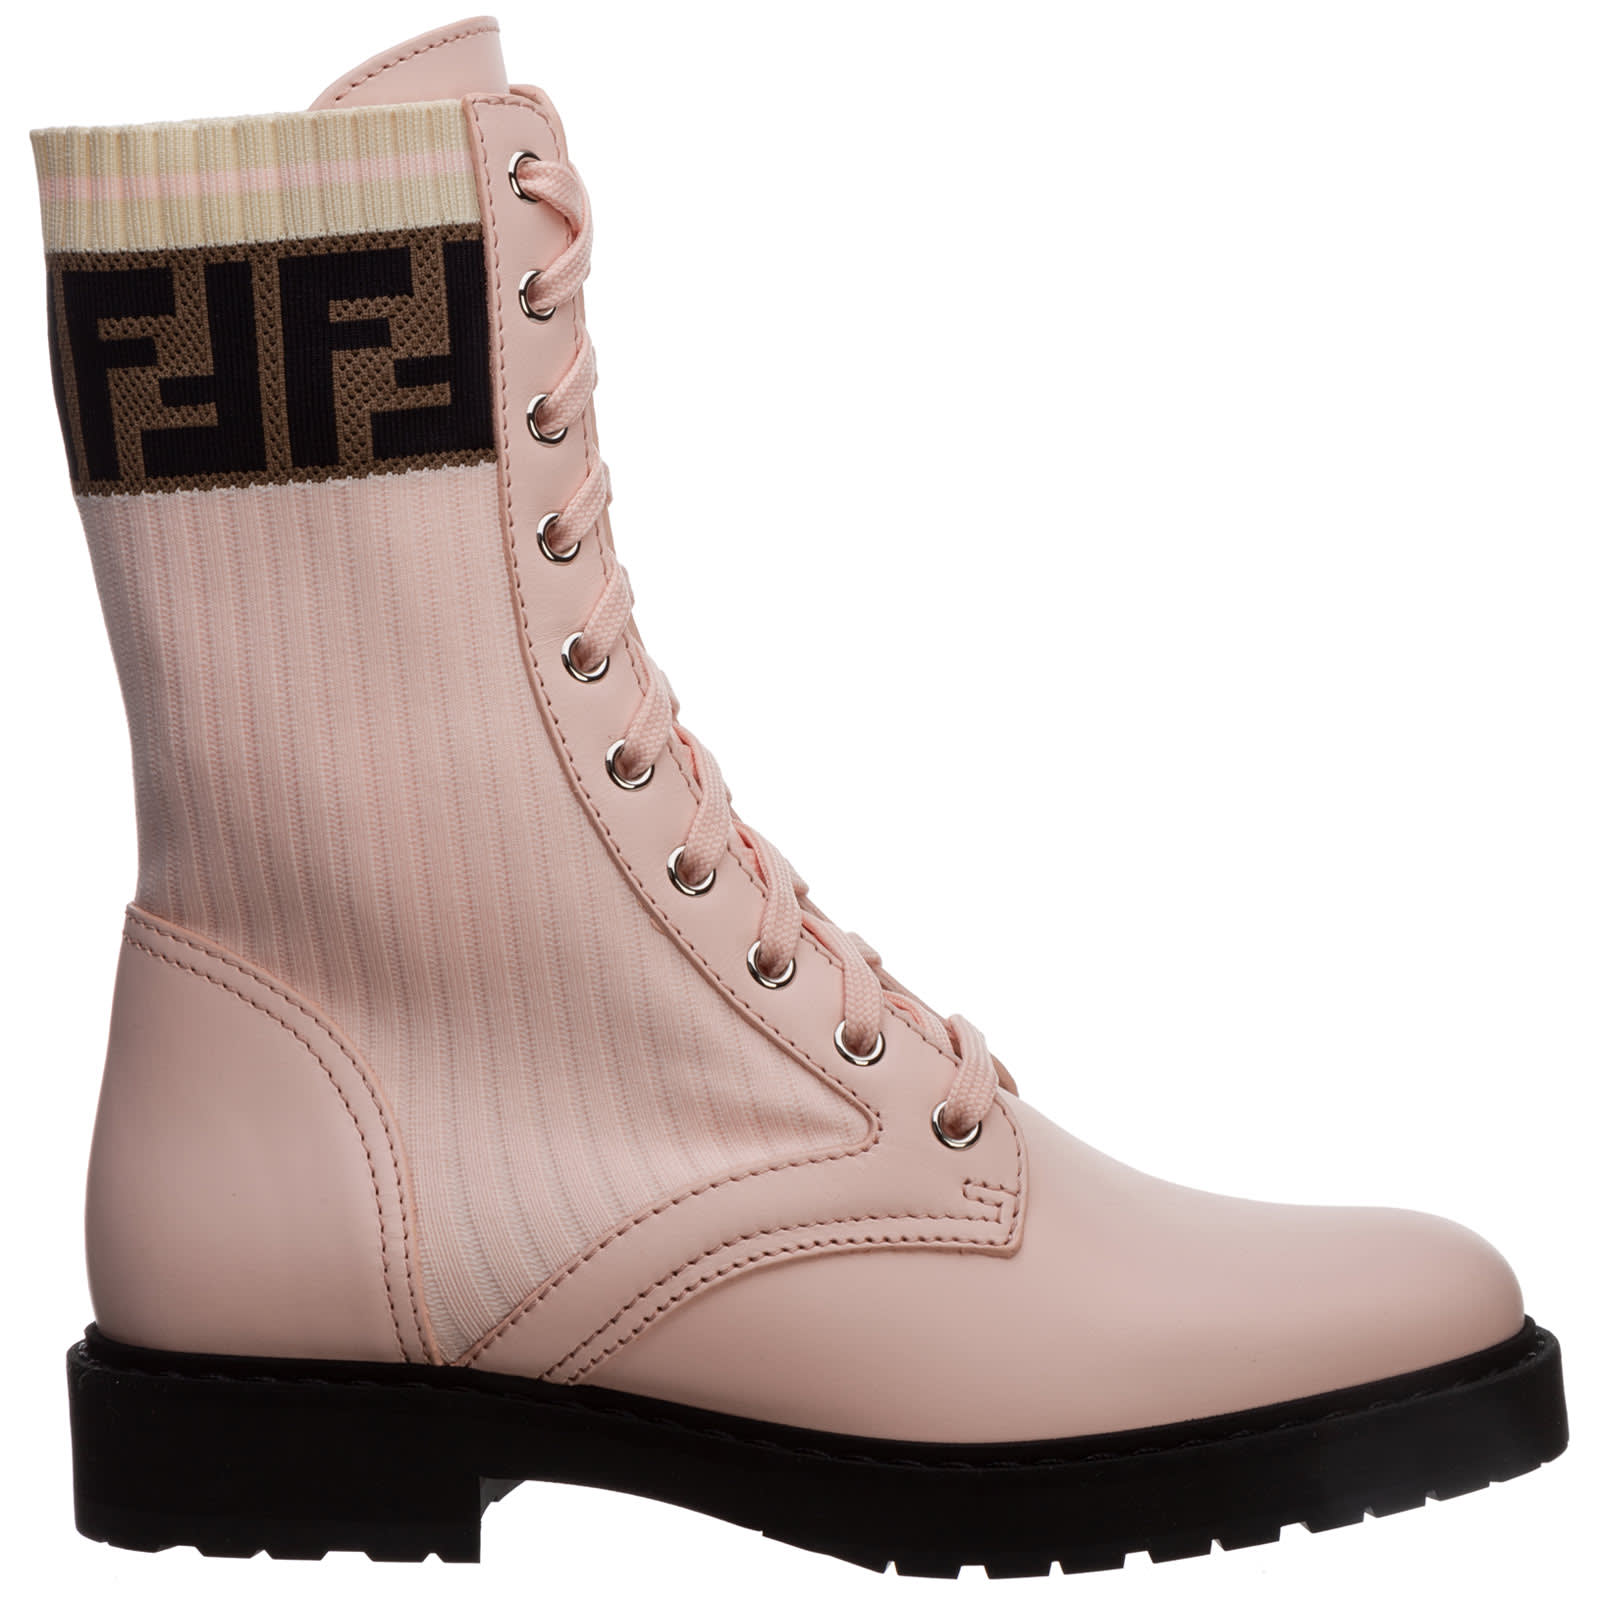 Buy Fendi Ventus 7 Ankle Boots online, shop Fendi shoes with free shipping